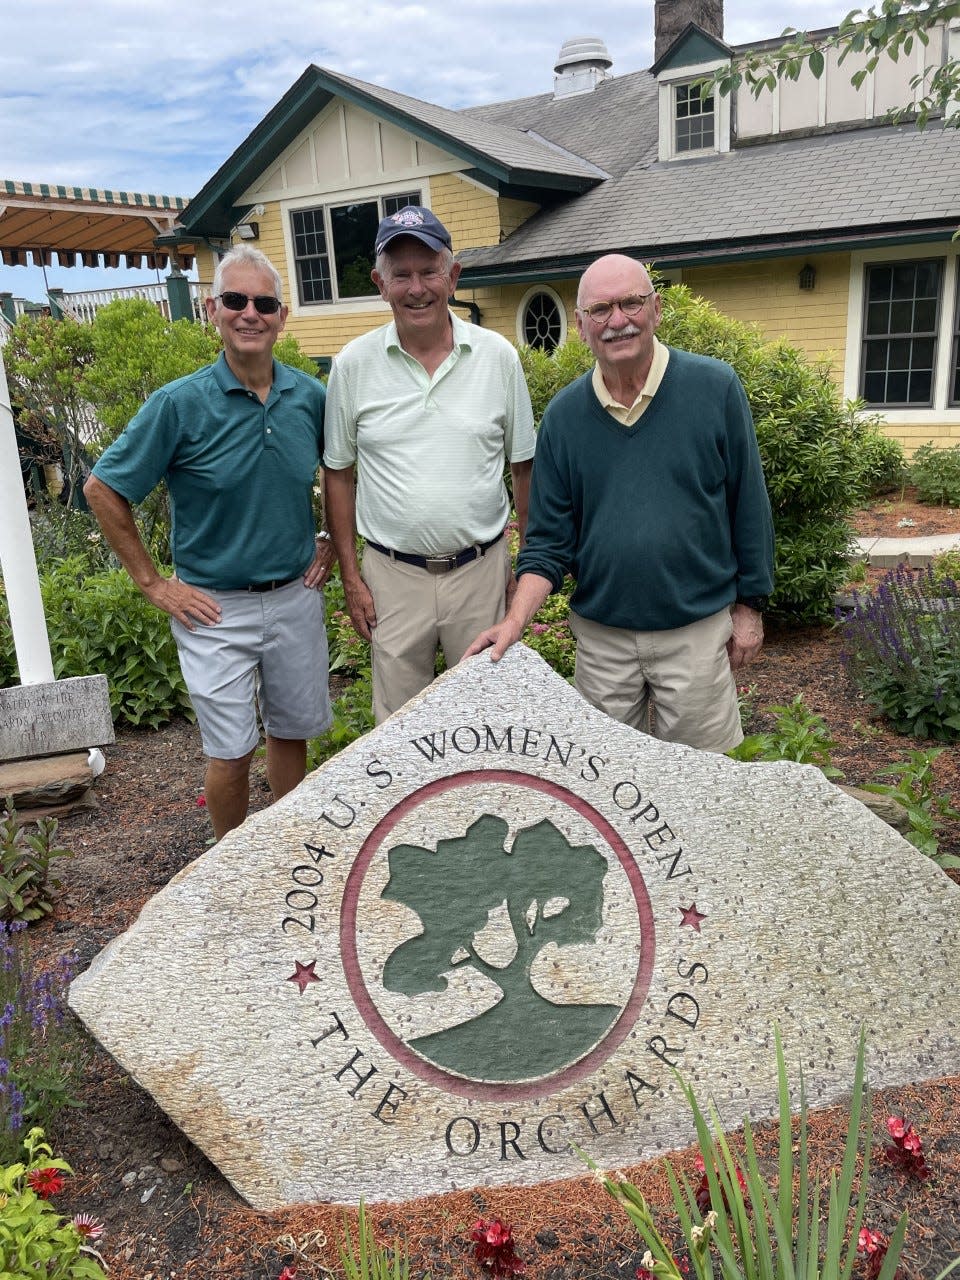 From left, Mark Hobby, Tom Wylie and Dr. Bill DuPont are members at The Orchards Golf Club, which hosted the 2004 U.S. Women’s Open.